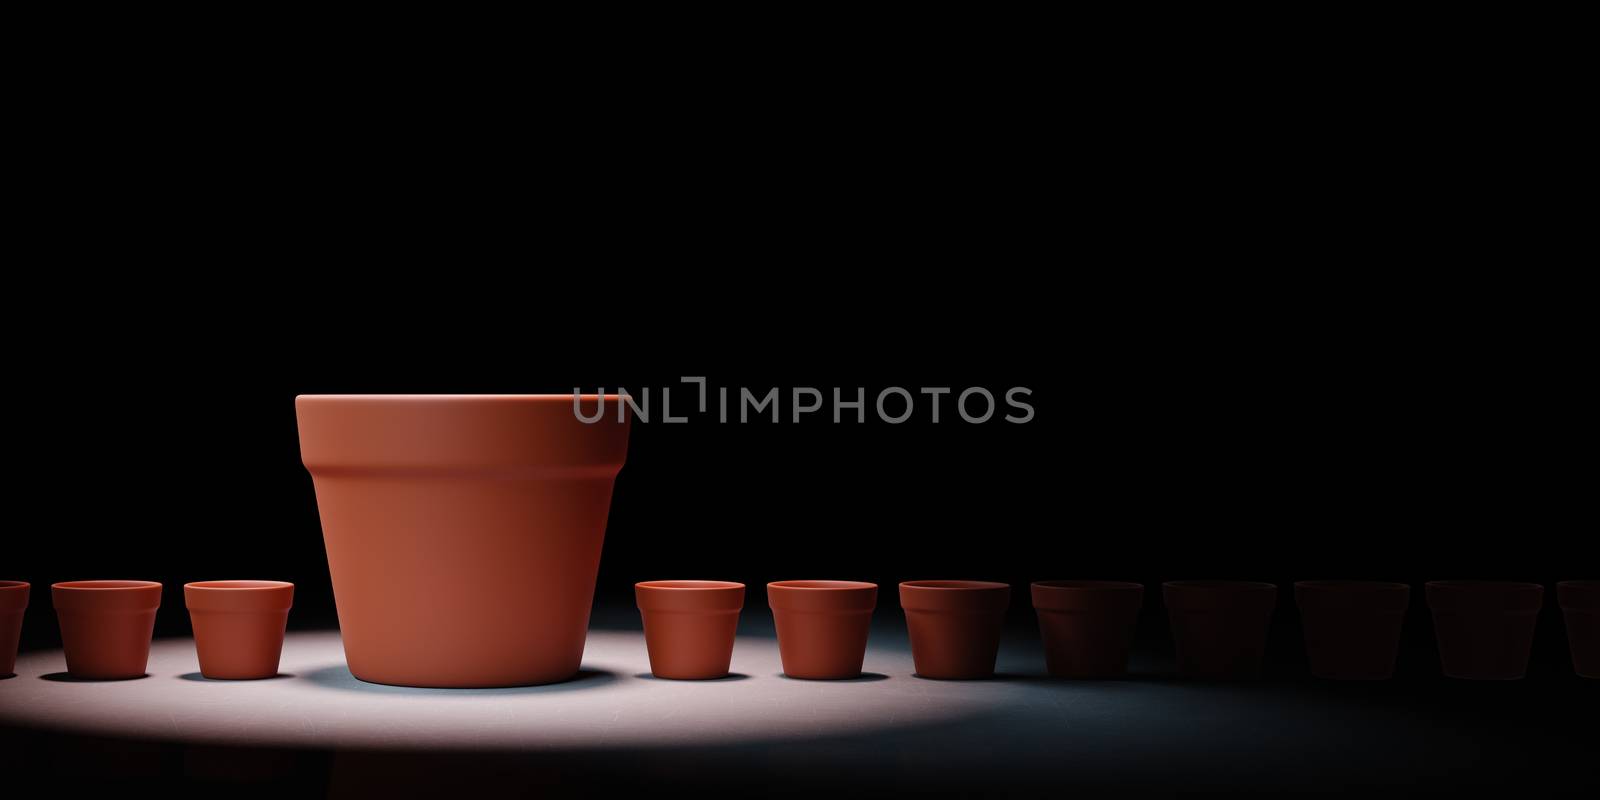 One Big Empty Flowerpot Between a Set of Small Flowerpots Spotlighted on Black Background with Copy Space 3D Illustration